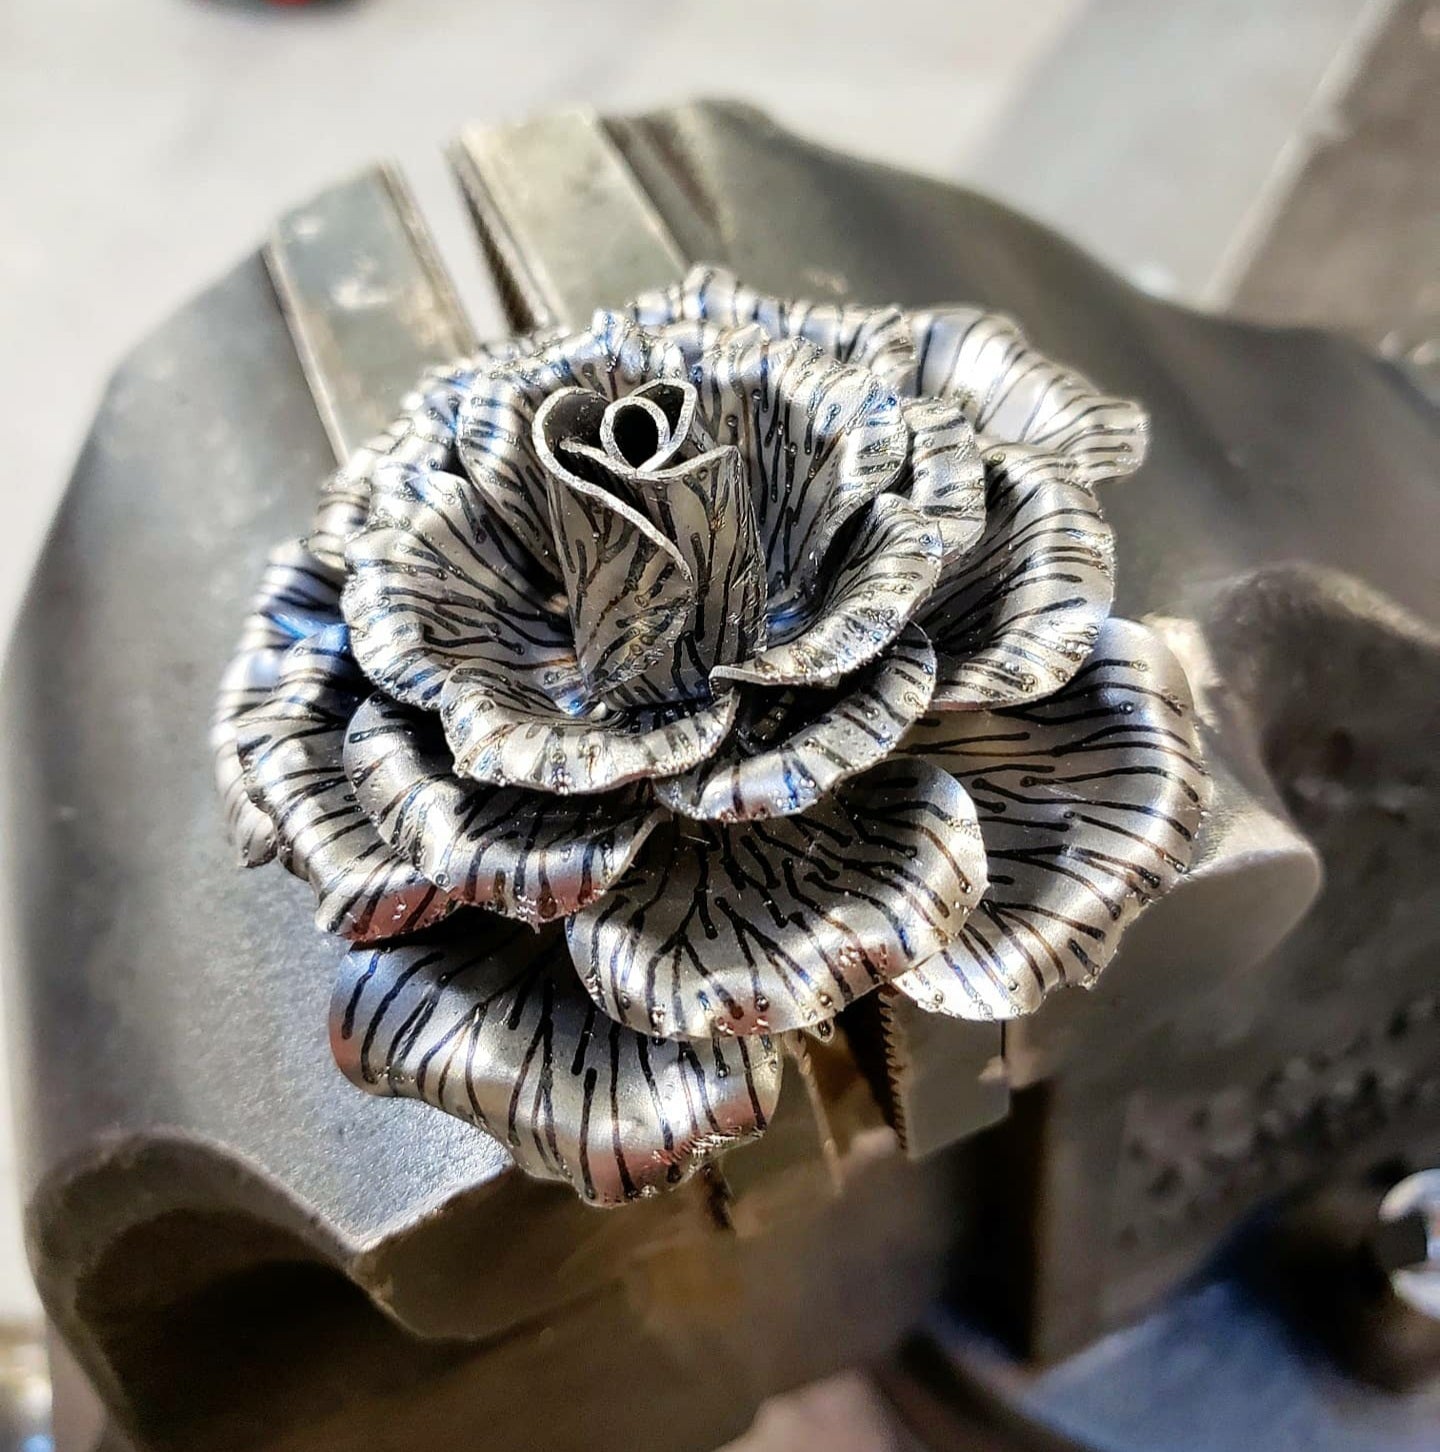 DIY "Pep" Rose Bud (No welding required) FREE SHIPPING!